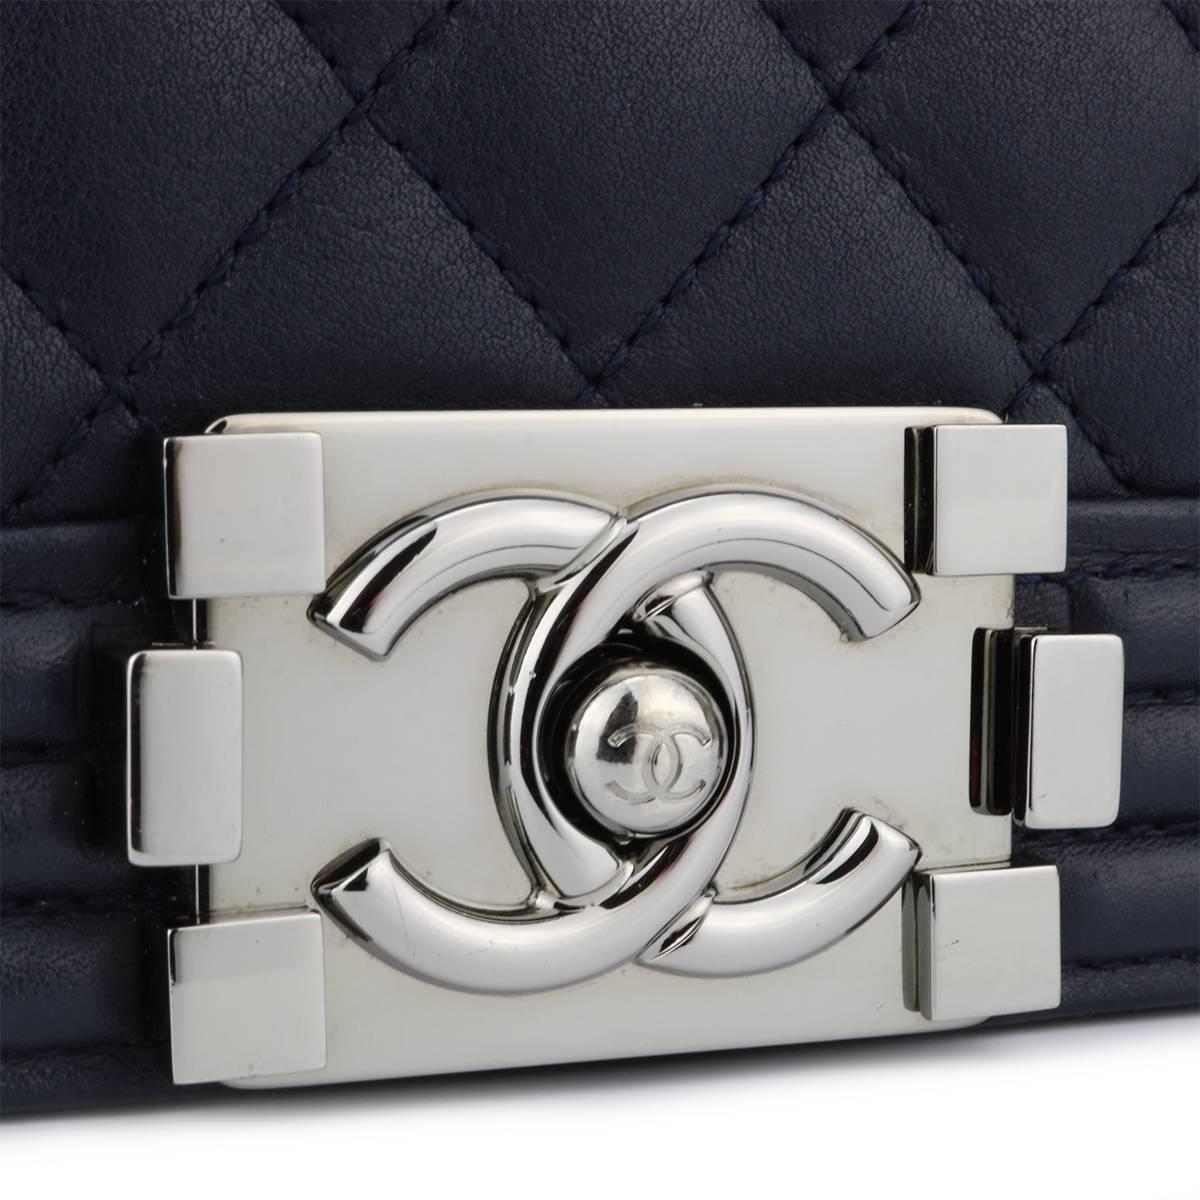 Authentic CHANEL New Medium Quilted Boy Navy Calfskin with Light Gunmetal Hardware 2015.

This stunning bag is still in a mint condition, the bag still holds its original shape and the hardware is still very clean and shiny.

Exterior Condition: